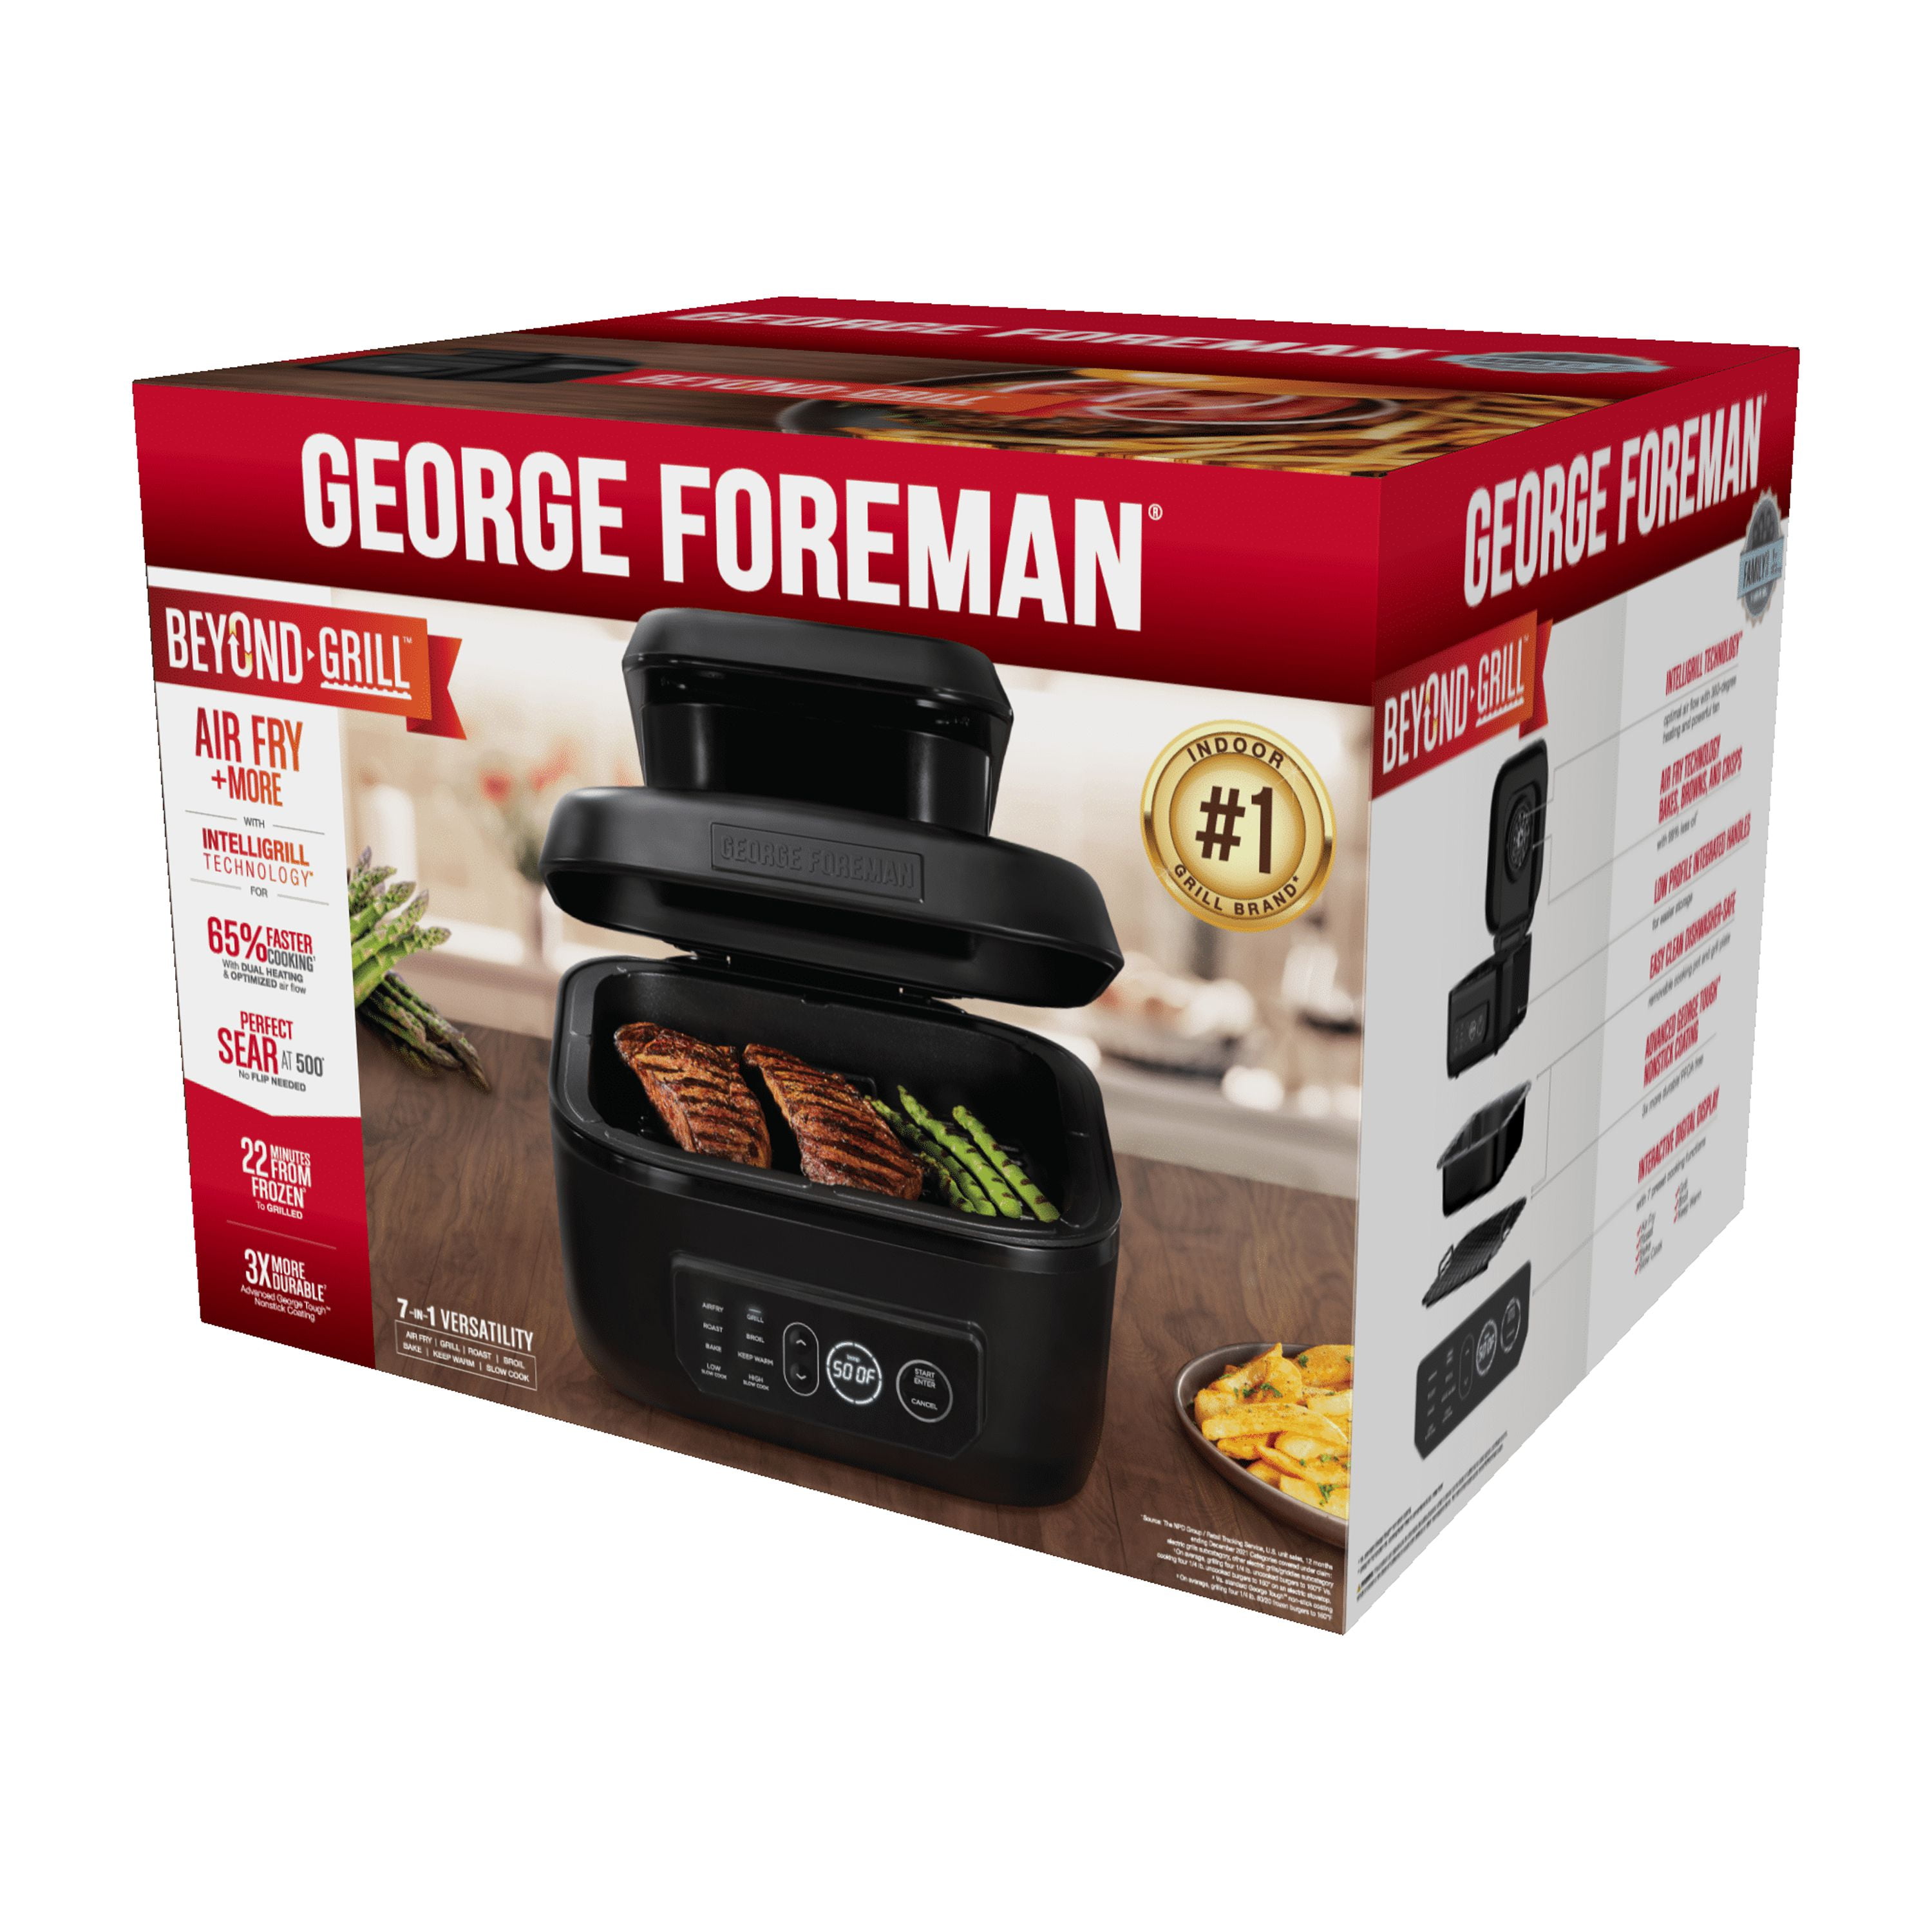 25 YEAR OLD George Foreman Grill vs NEW Ninja Indoor Grill 